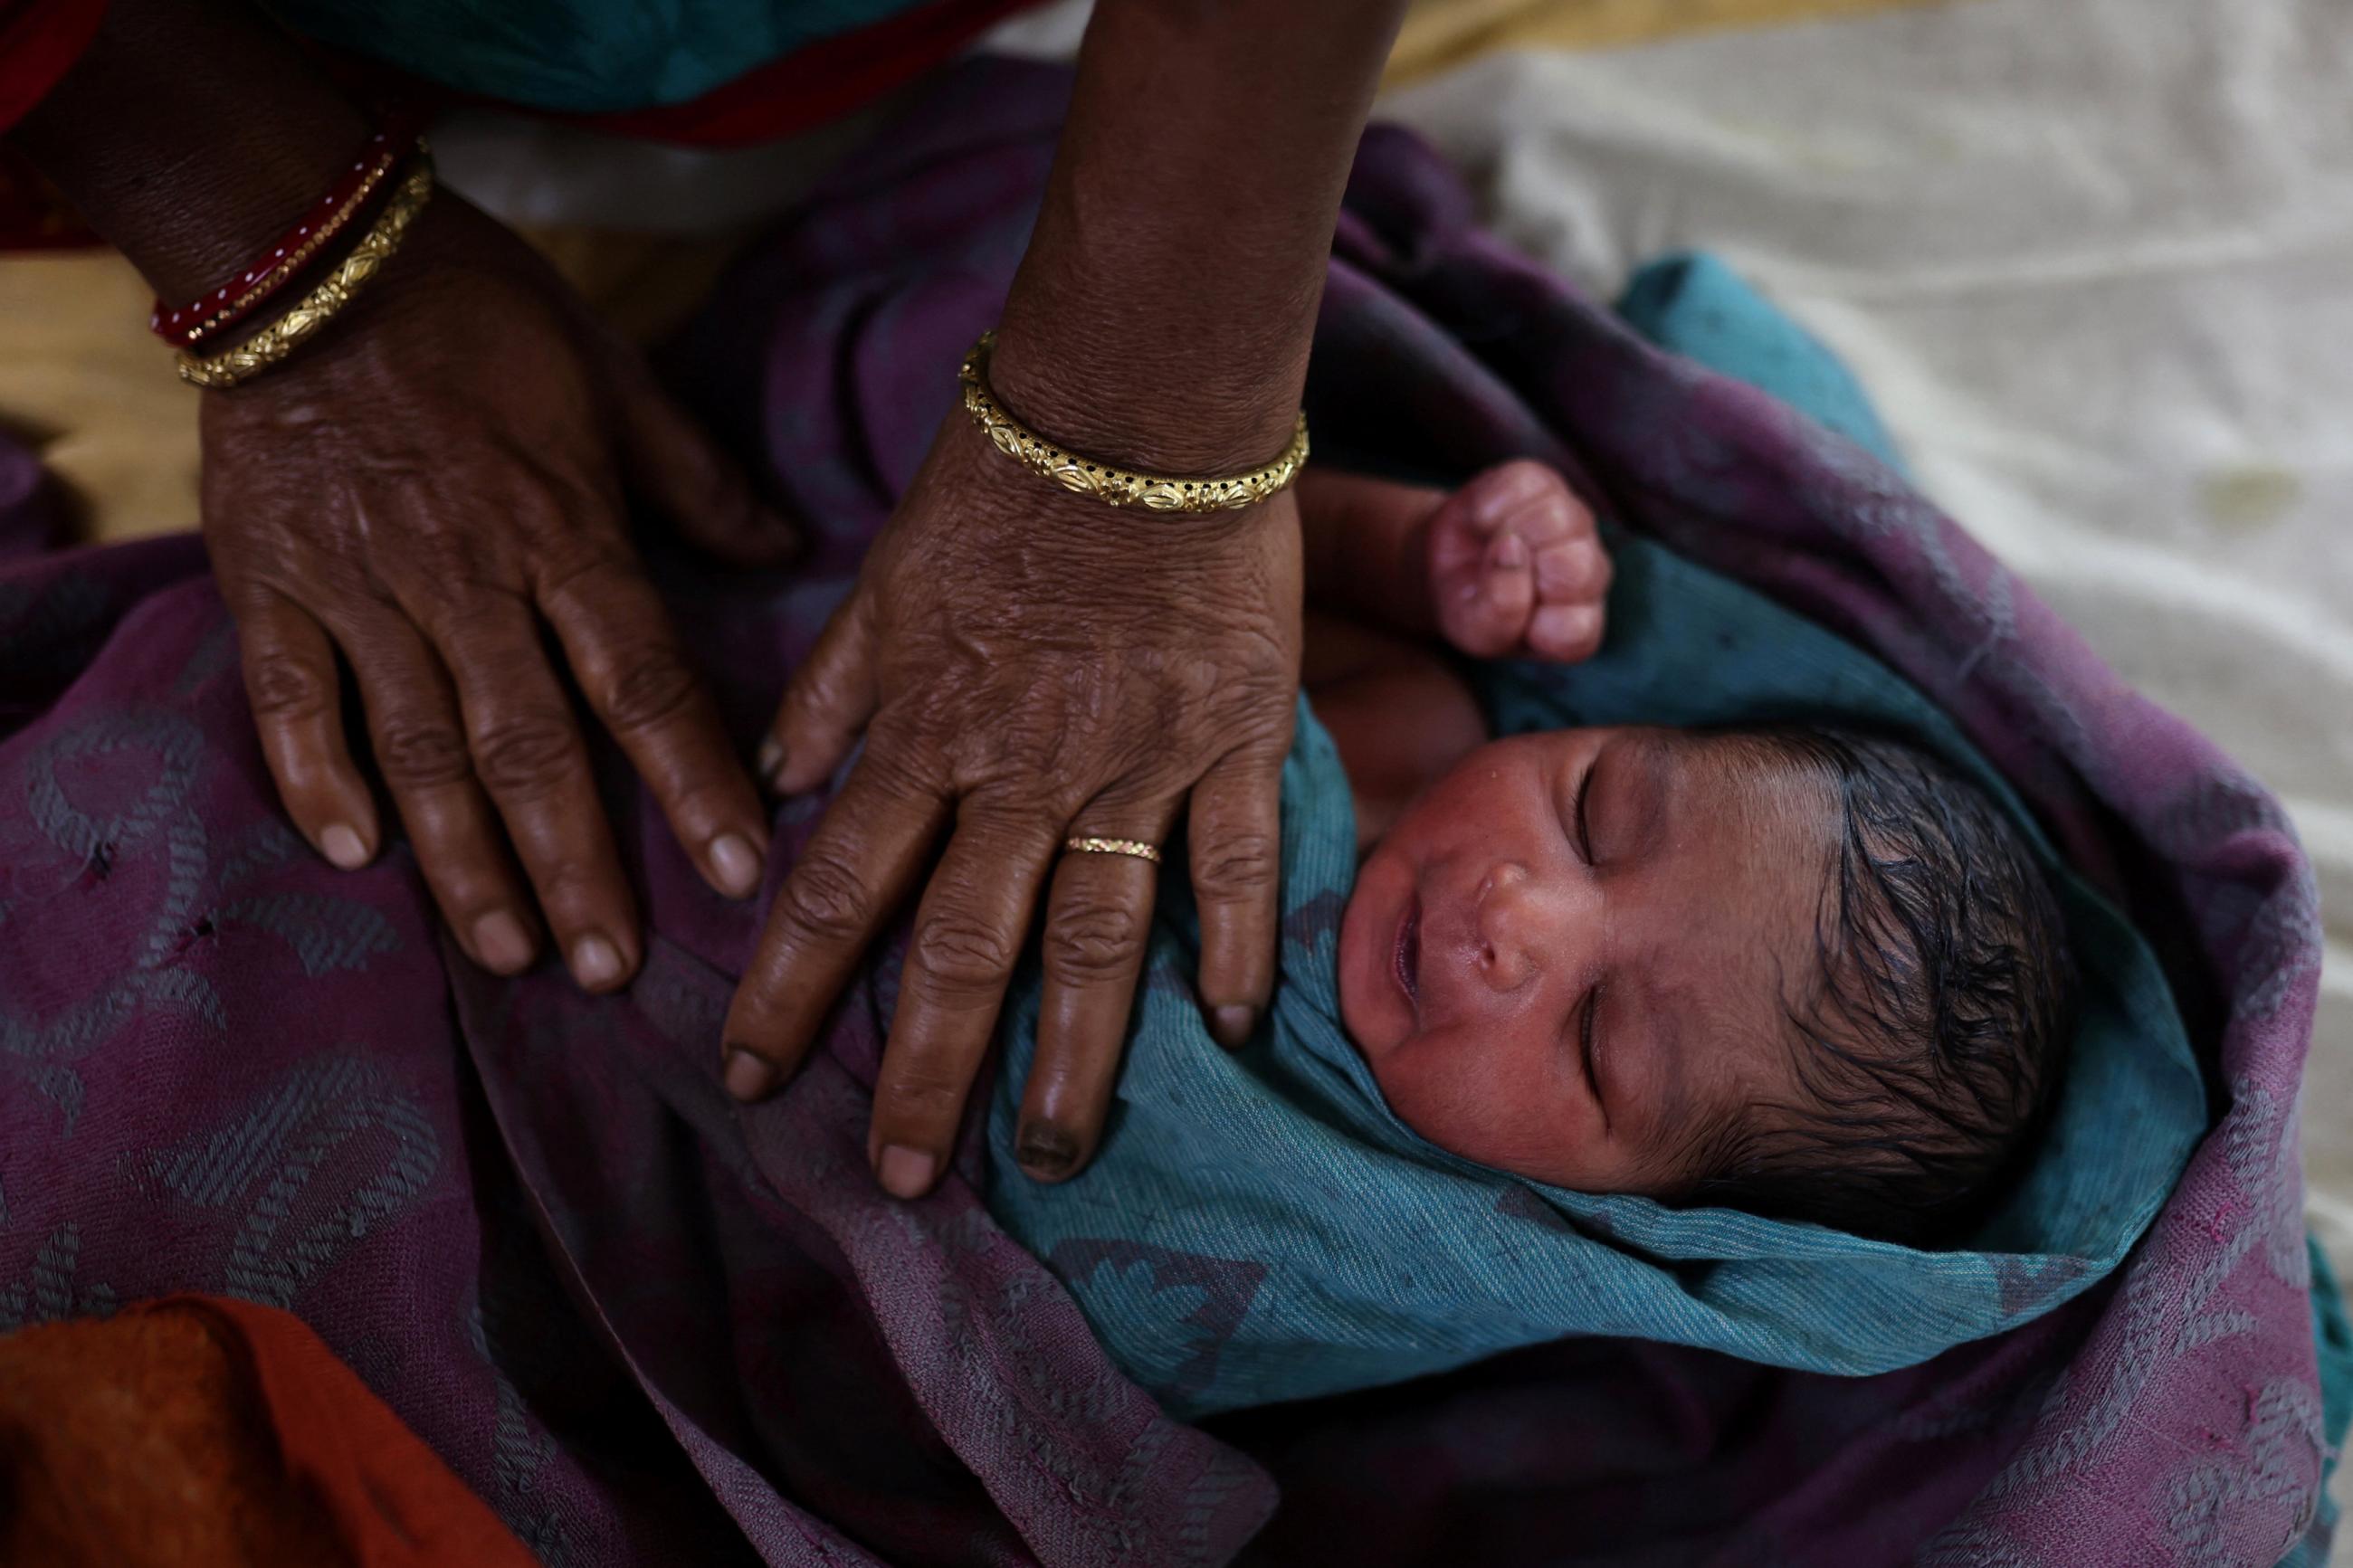 A nurse takes care of a newborn baby after the birth at a hospital in Kishanganj district, Bihar, India, March 20, 2023. India's fertility rate, fell to 2.0 in 2019-2021, but state health officials estimate Kishanganj's fertility rate at 4.8 or 4.9, creating population growth that the state is trying to curb with the distribution of condoms and birth control pills. REUTERS/Anushree Fadnavis